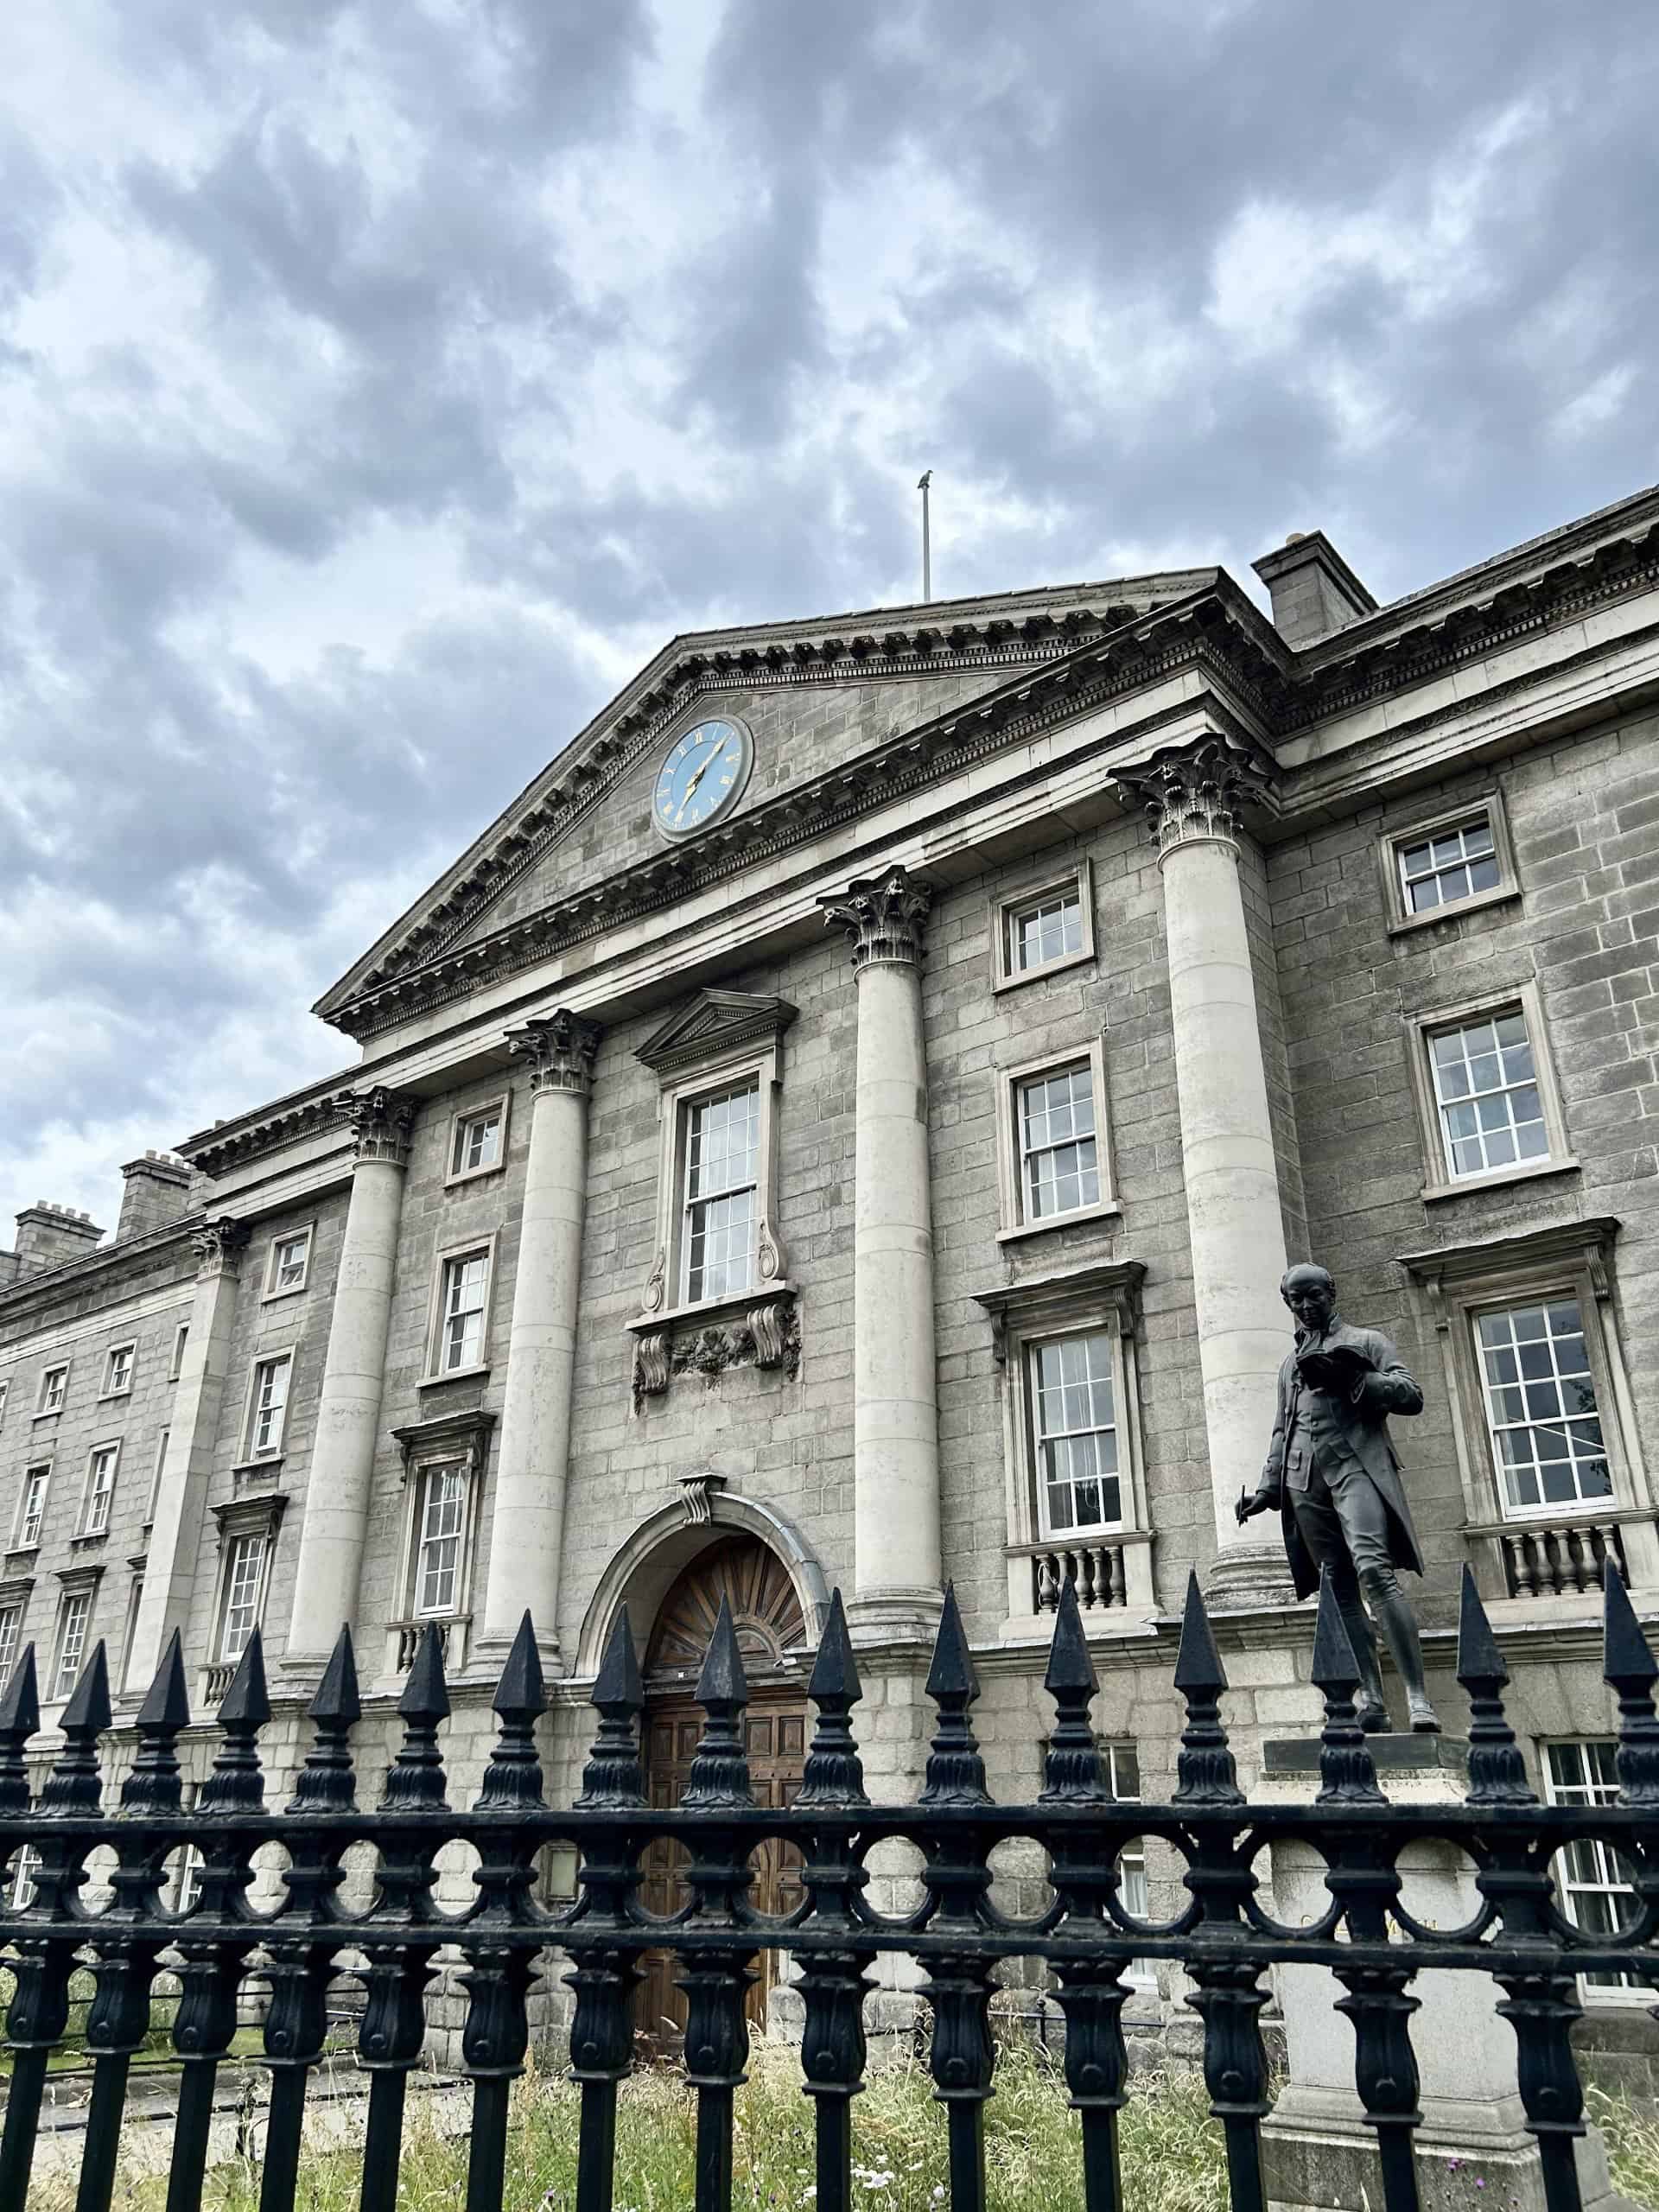 Main entrance to Trinity College in Dublin